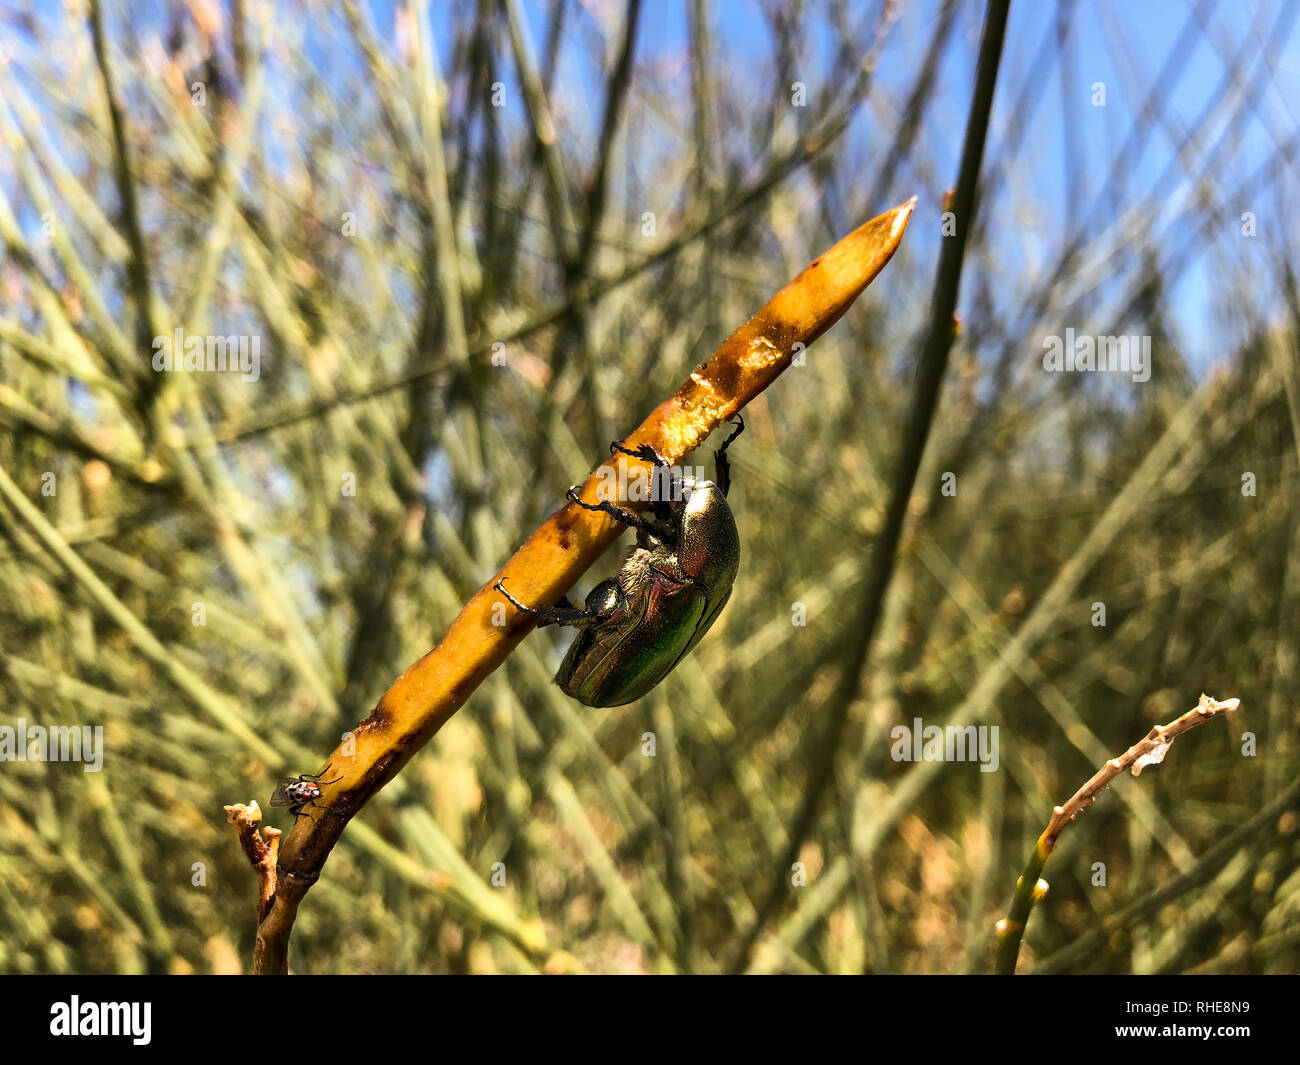 Dung beetle on a plant. Stock Photo